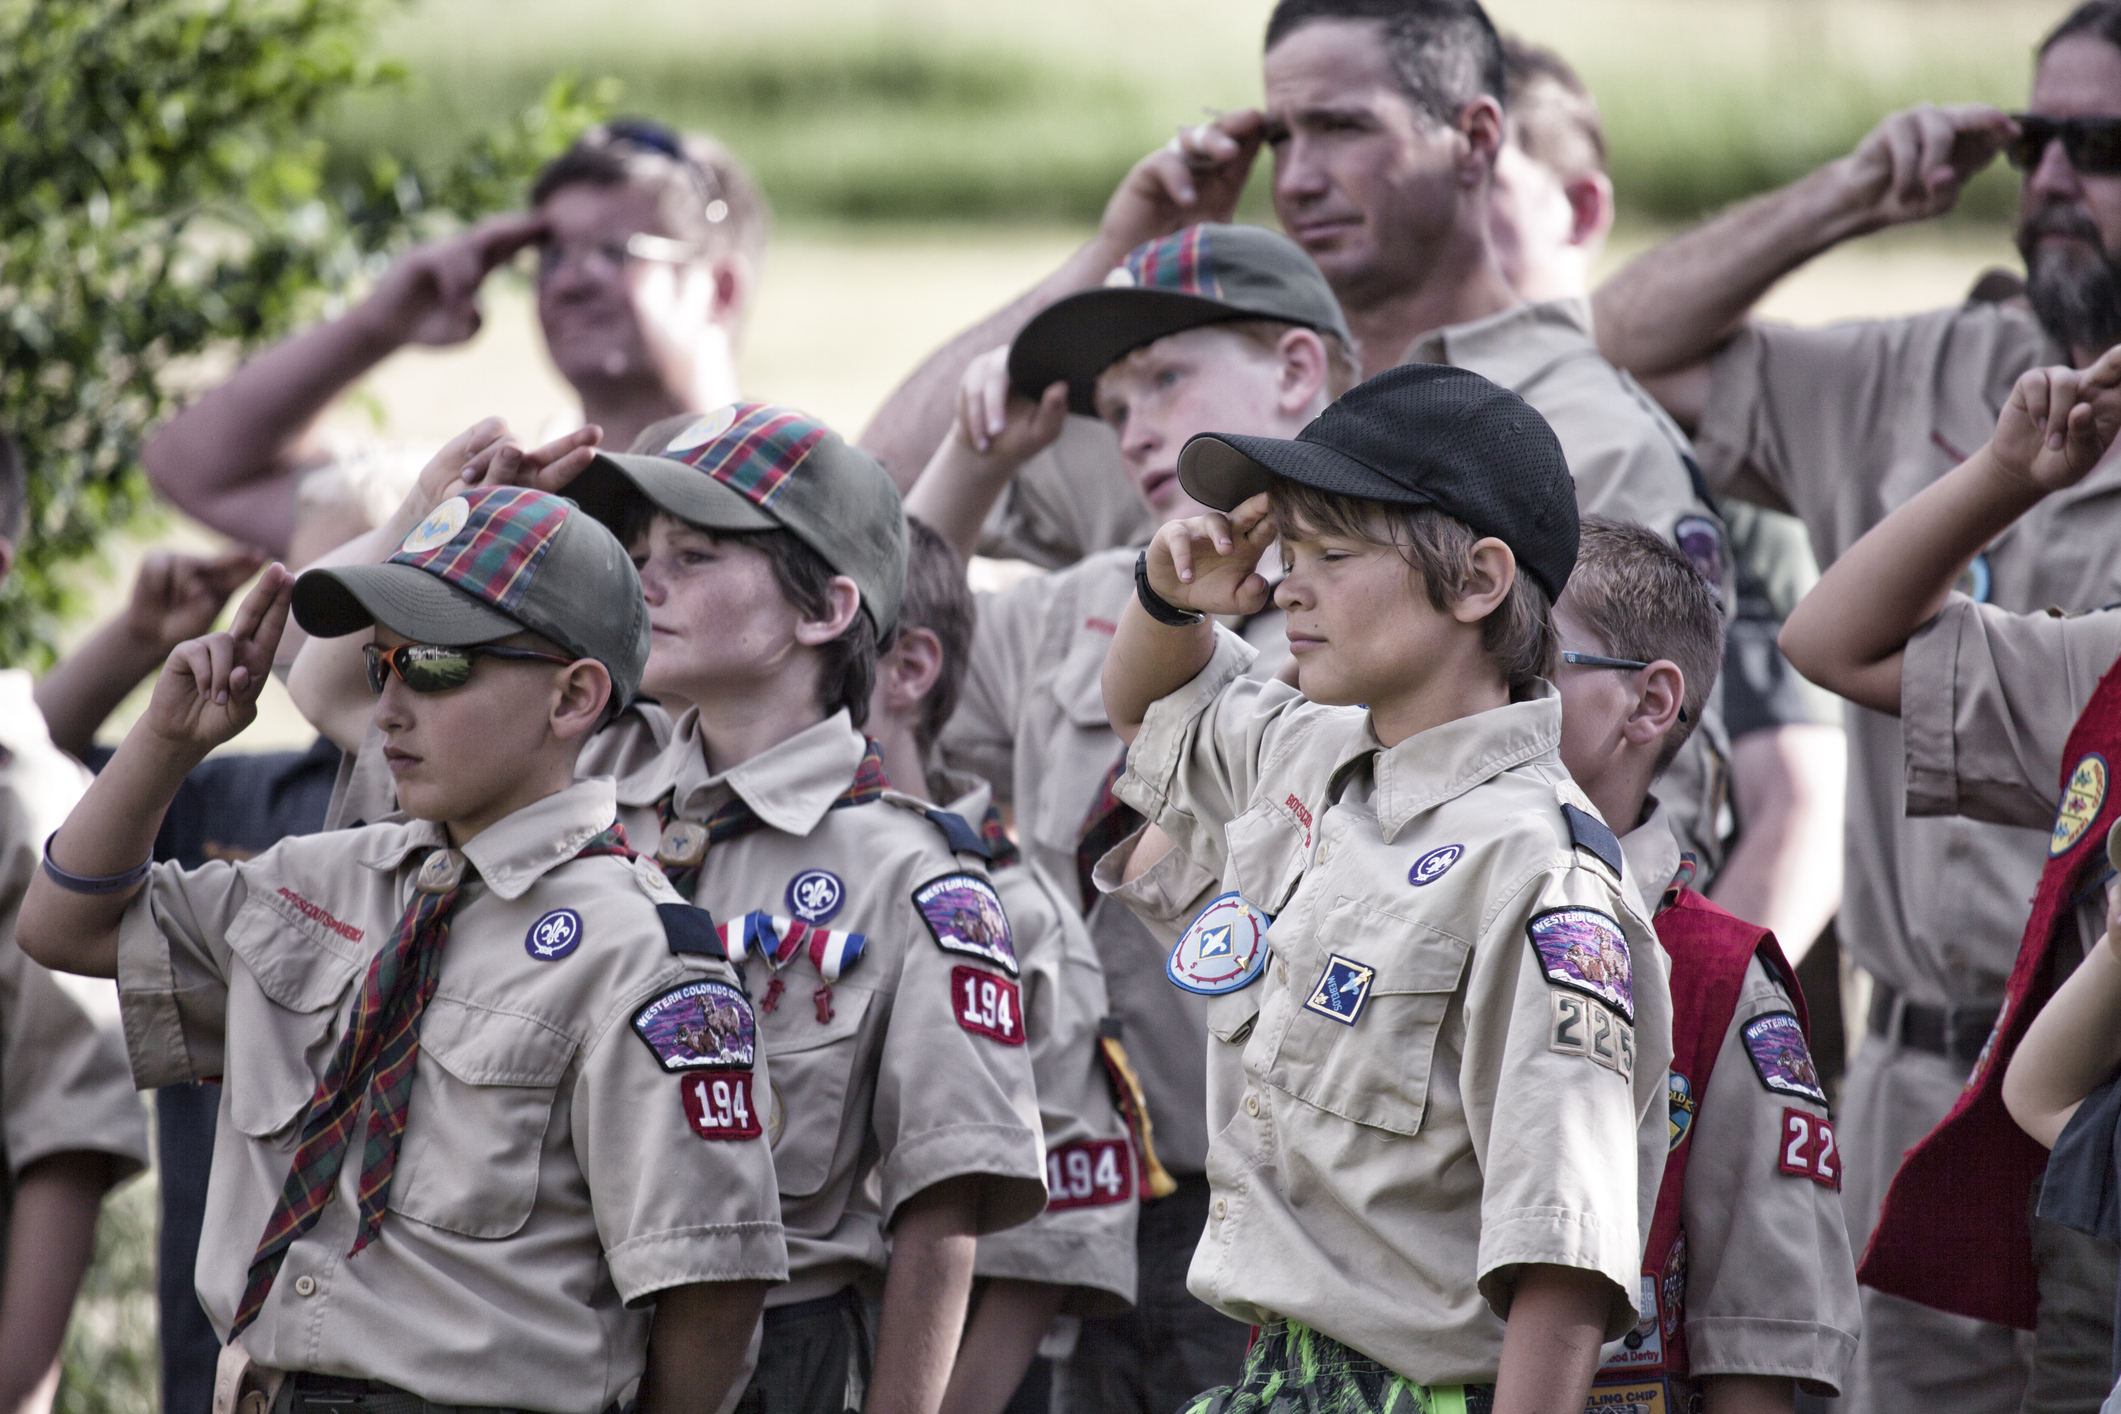 Boy Scouts Want To Include Everyone, But Now No One Wants To Join